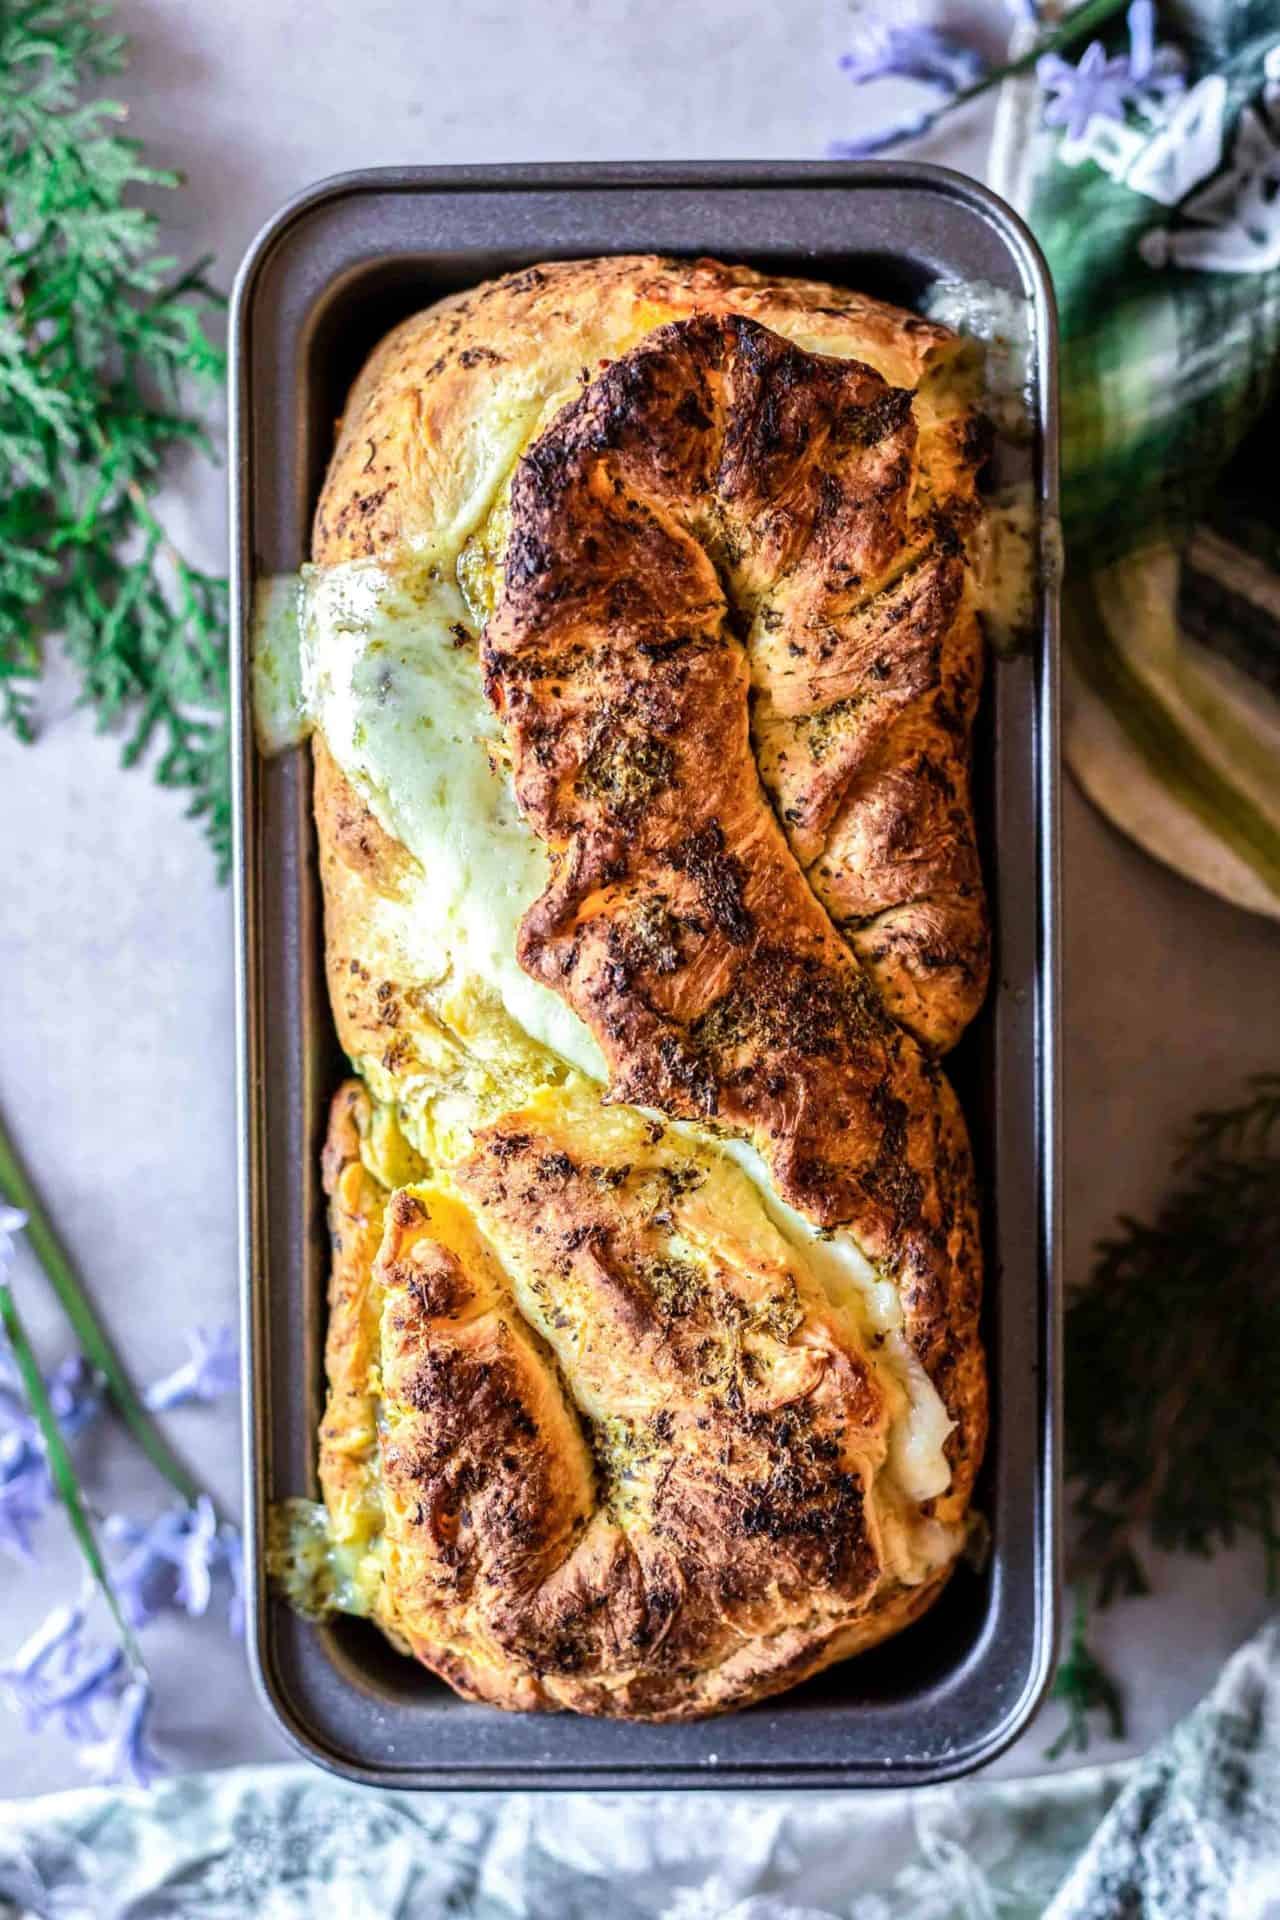 This Gluten Free Mozzarella and Pesto Stuffed Bread is pillowy soft, tender, flavorful, so cheesy, pesto-infused, and just beyond delicious!